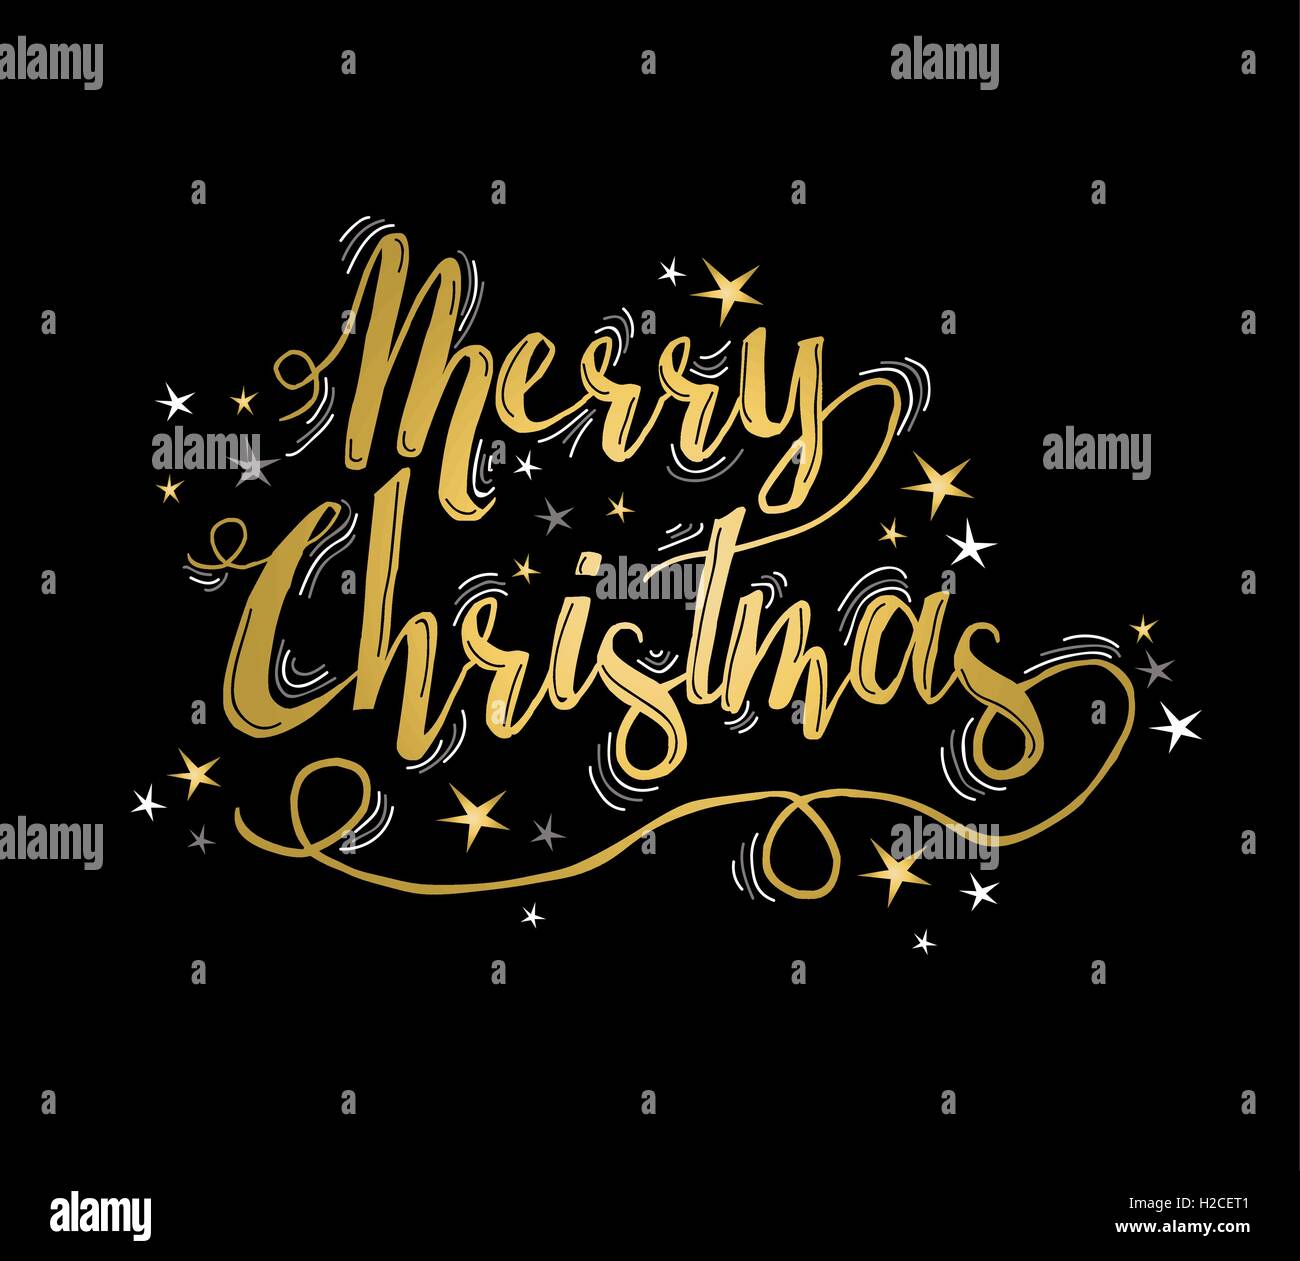 Merry christmas gold lettering design with stars. Xmas calligraphy text quote for holiday greeting card. EPS10 vector. Stock Vector